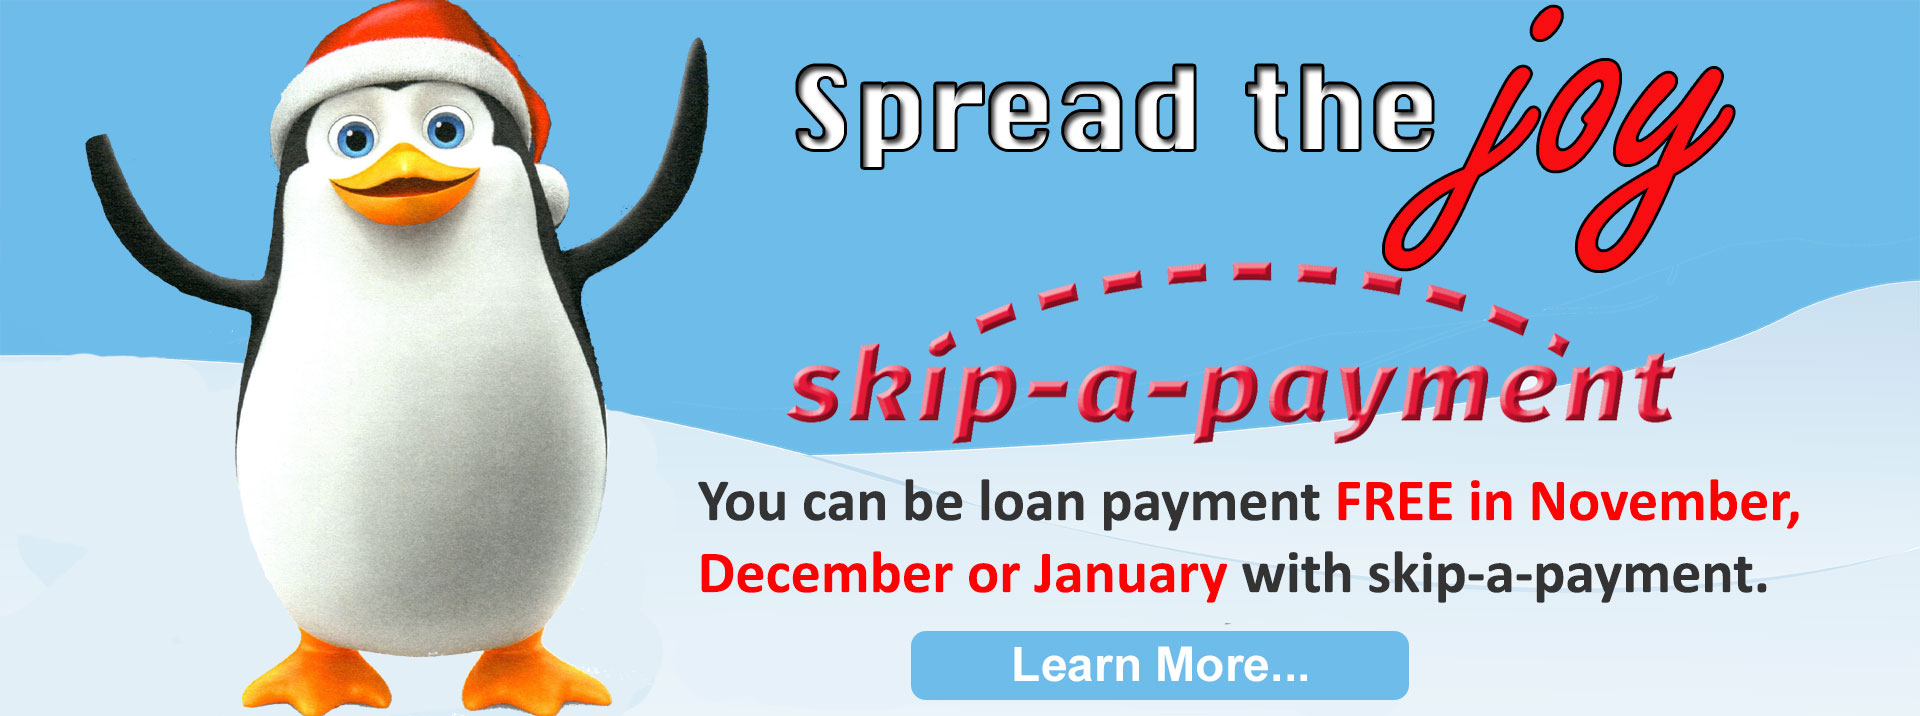 For only $25 per loan you can be payment free for the month of November, December or January.